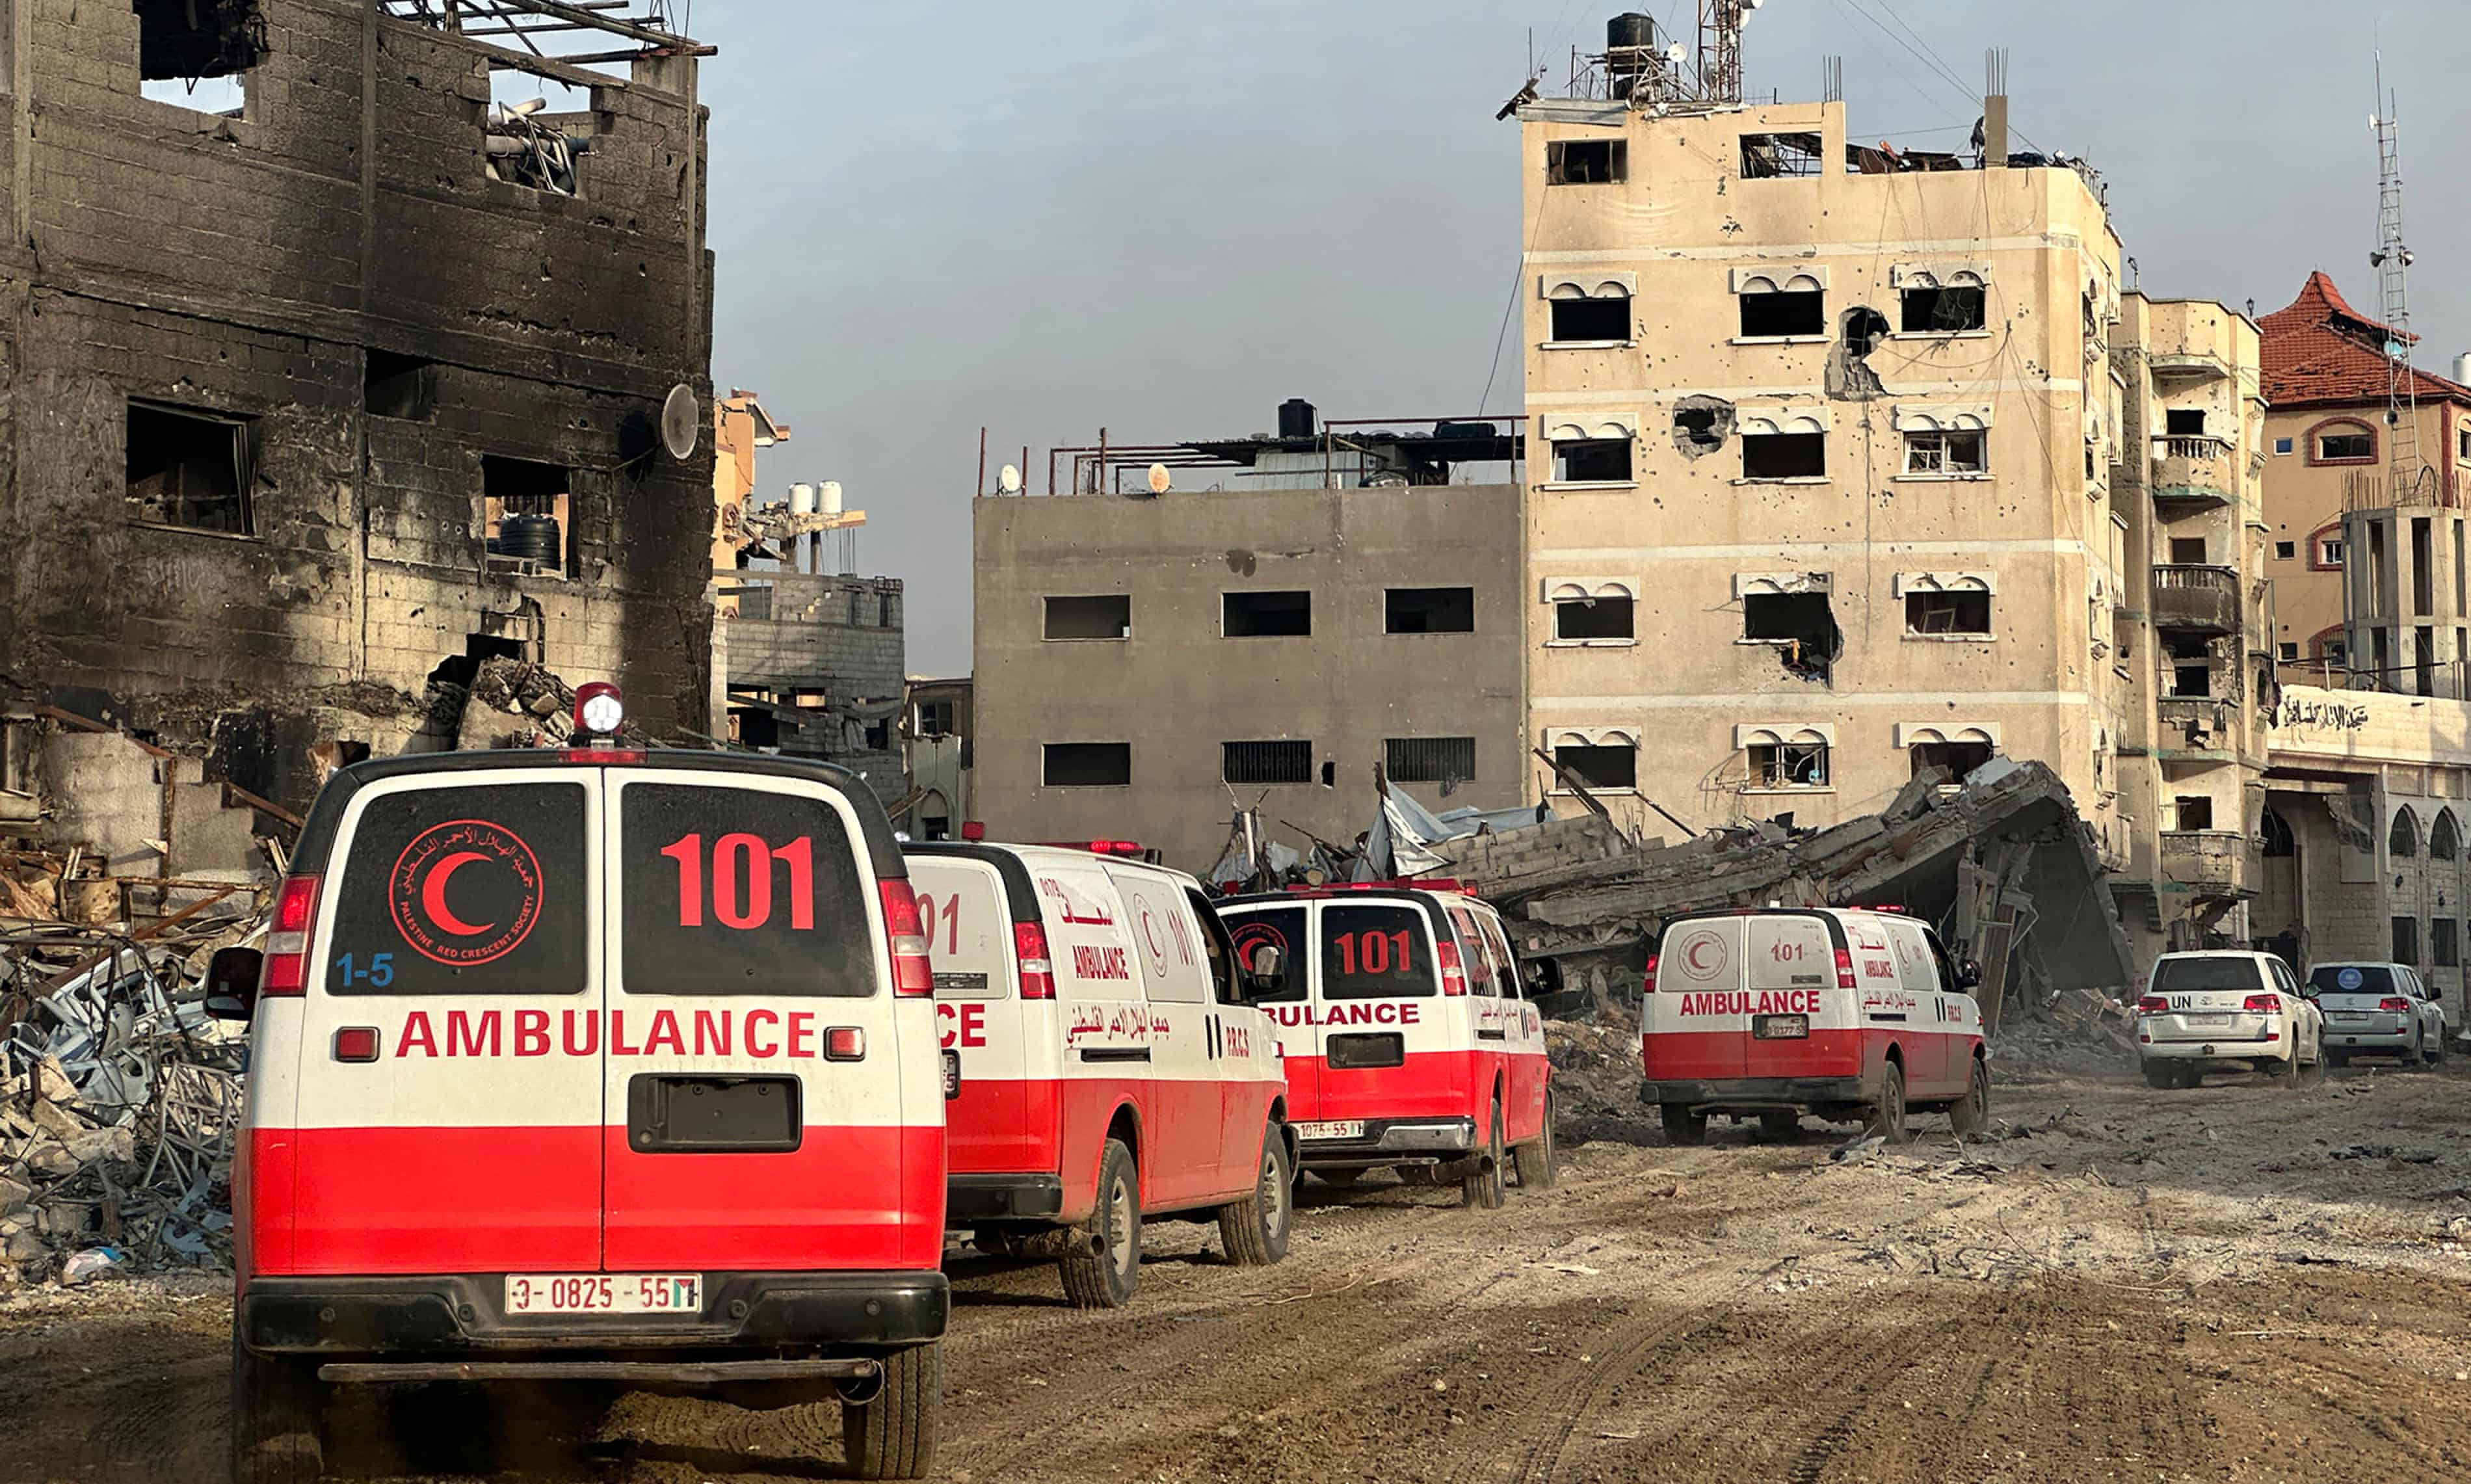 Medics trapped by Israeli gunfire at two Gaza hospitals, says Red Crescent (theguardian.com)